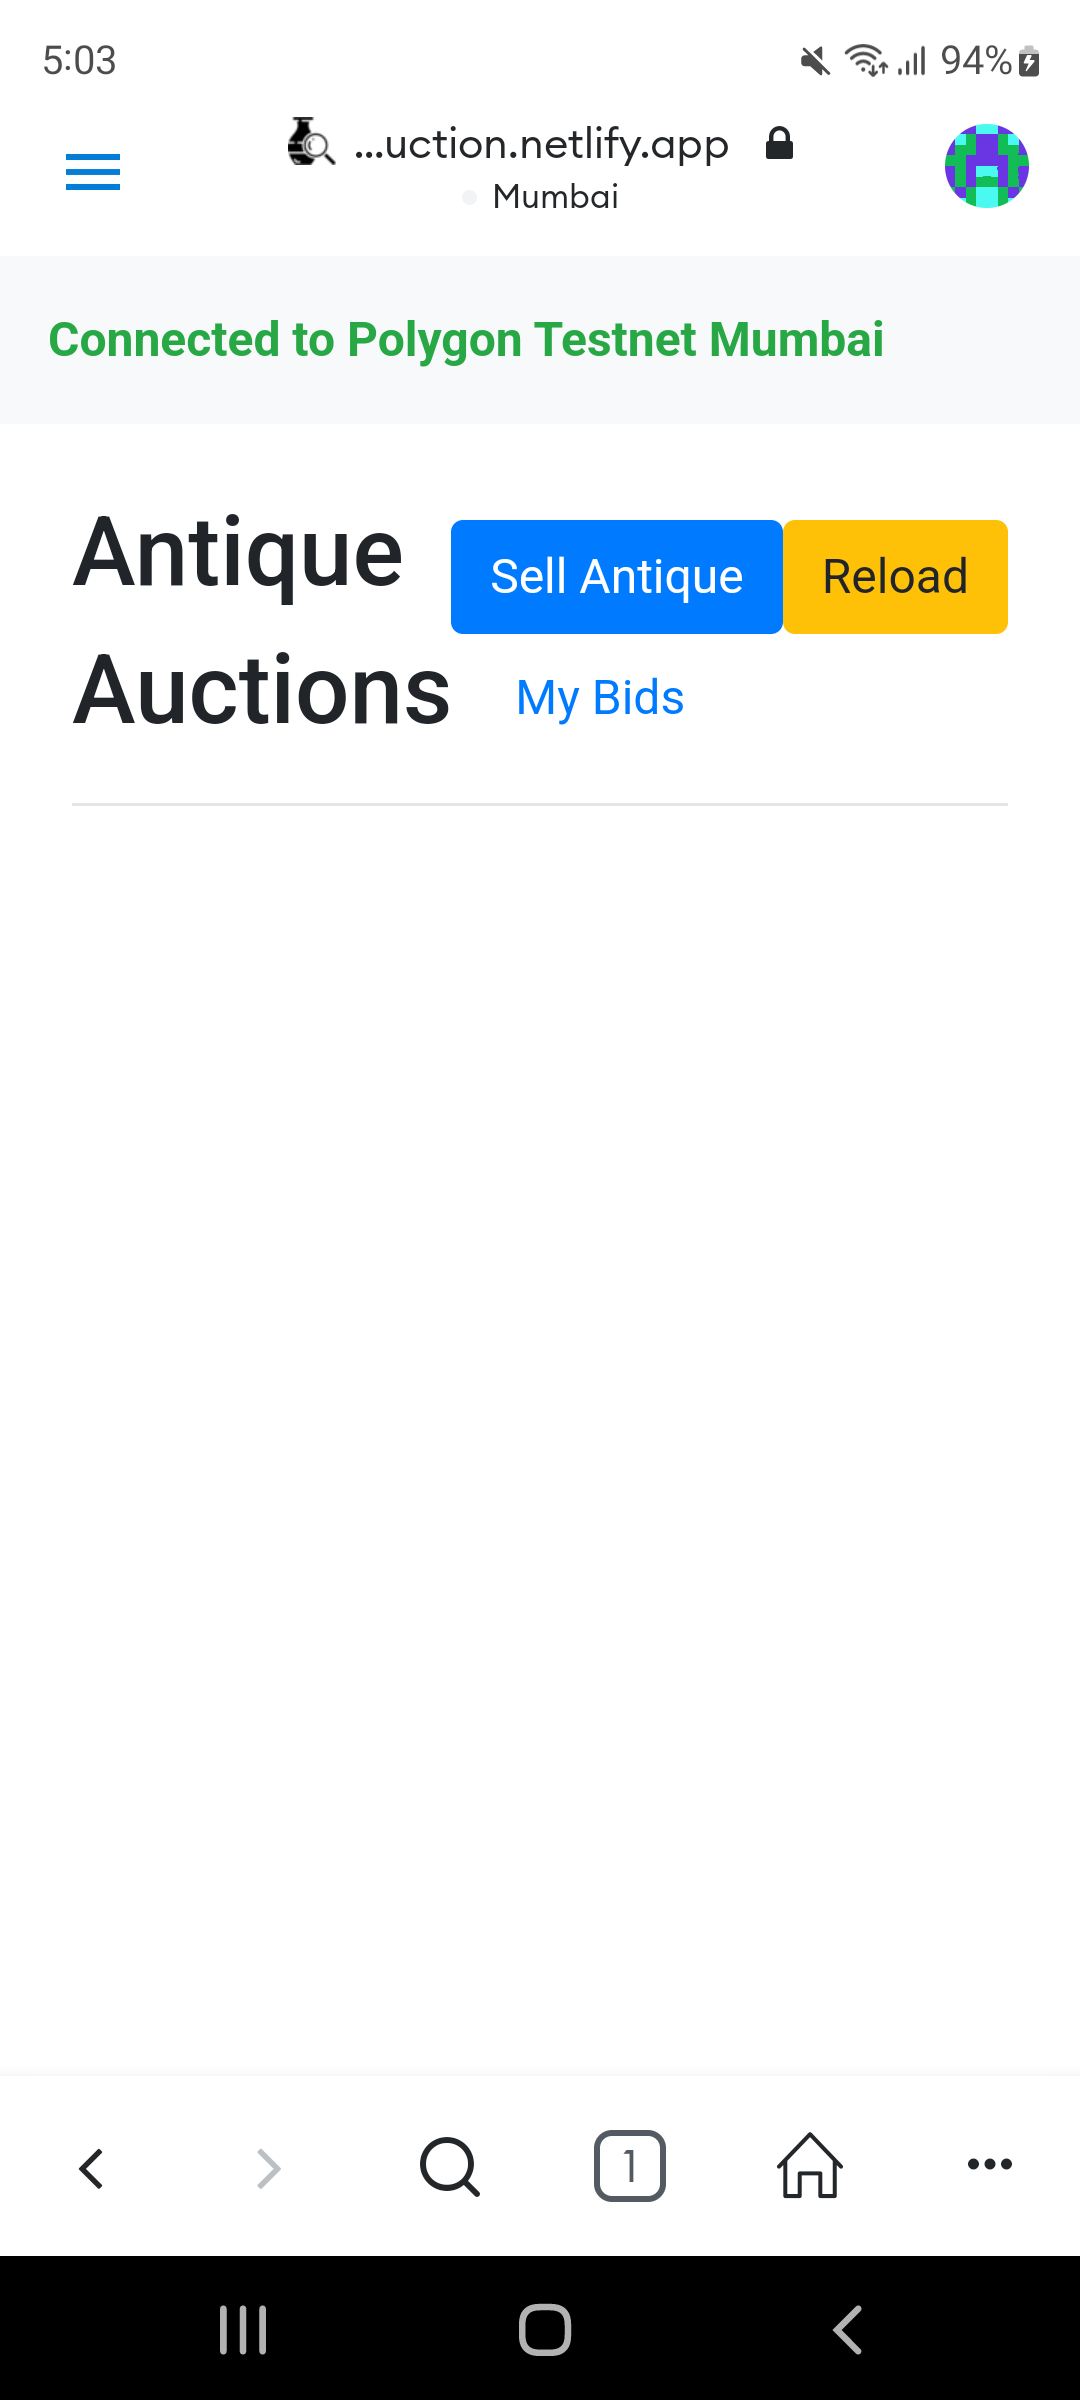 End Auction - 4 of 4